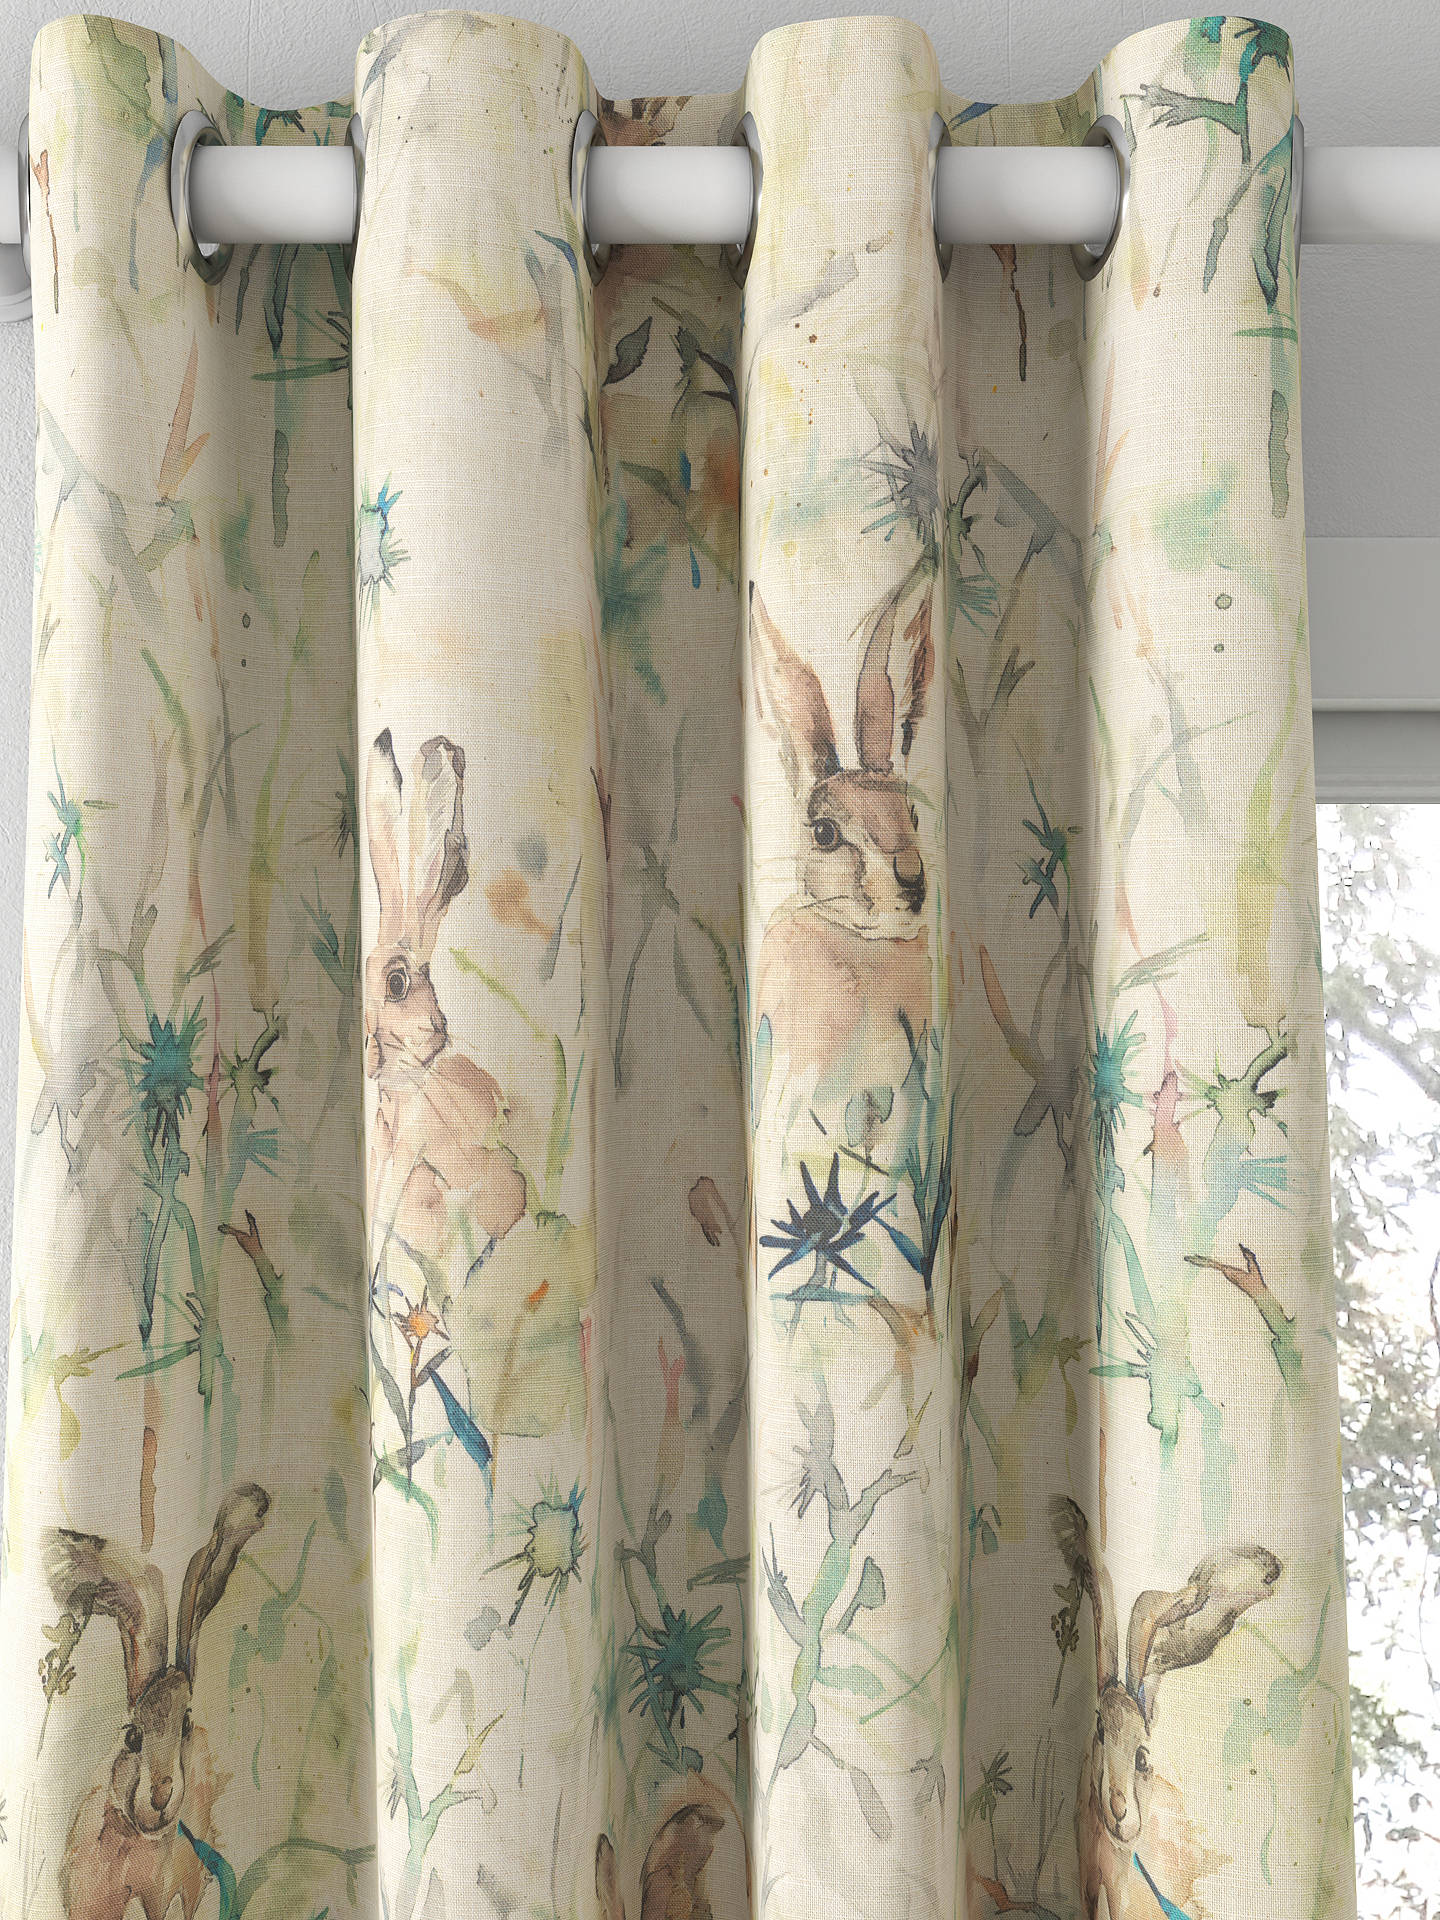 Voyage Jack Rabbit Made to Measure Curtains, Linen